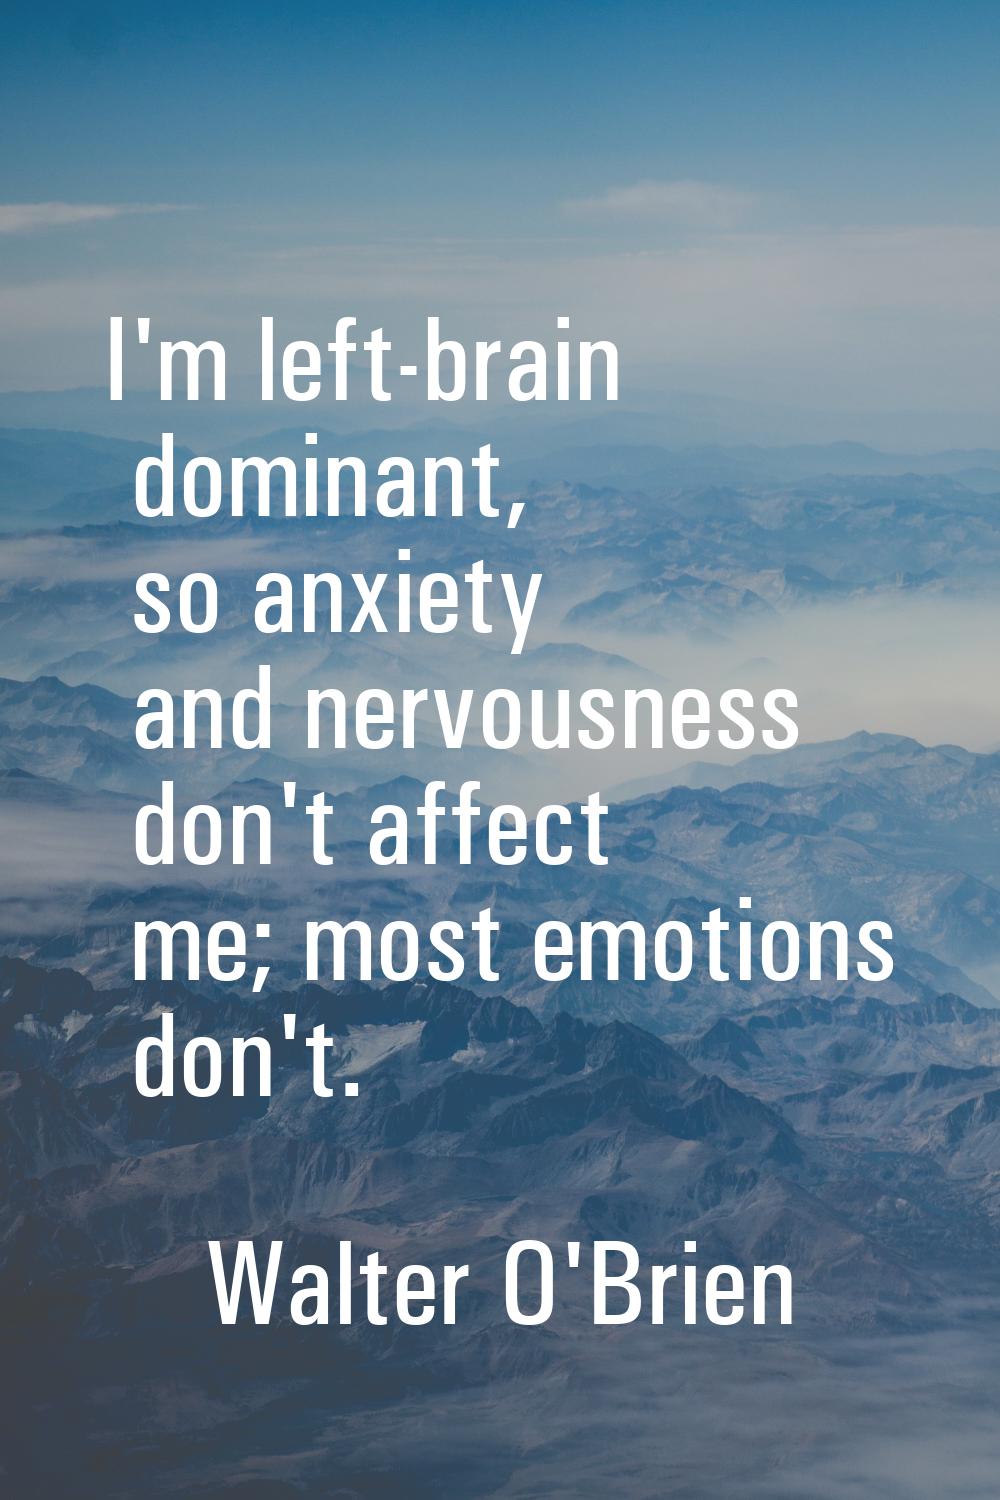 I'm left-brain dominant, so anxiety and nervousness don't affect me; most emotions don't.